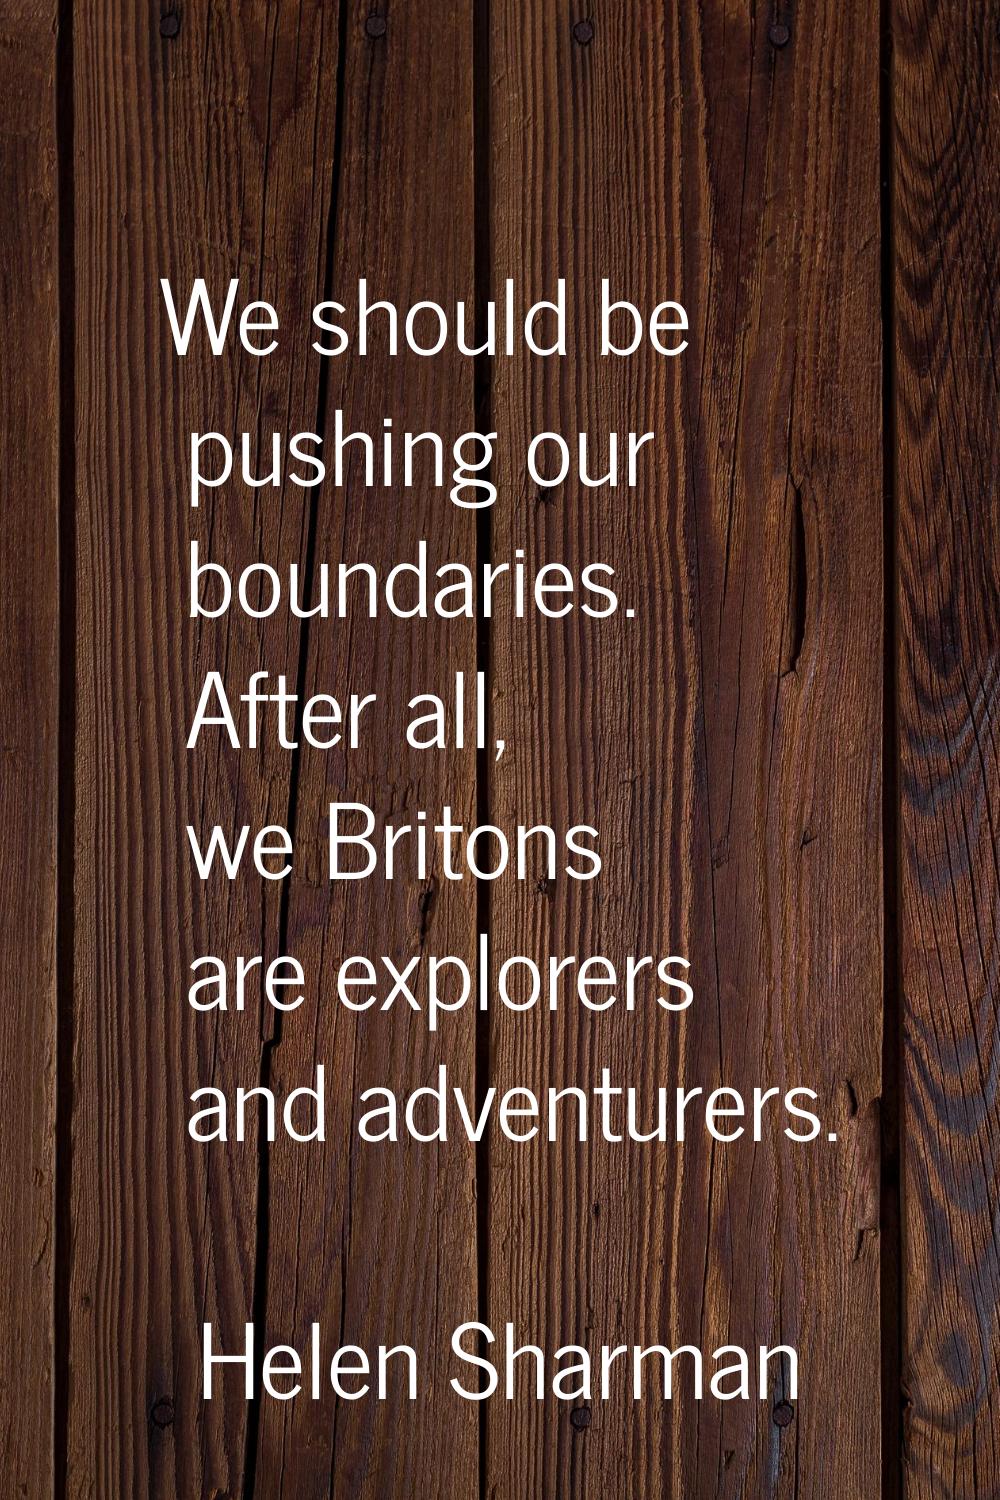 We should be pushing our boundaries. After all, we Britons are explorers and adventurers.